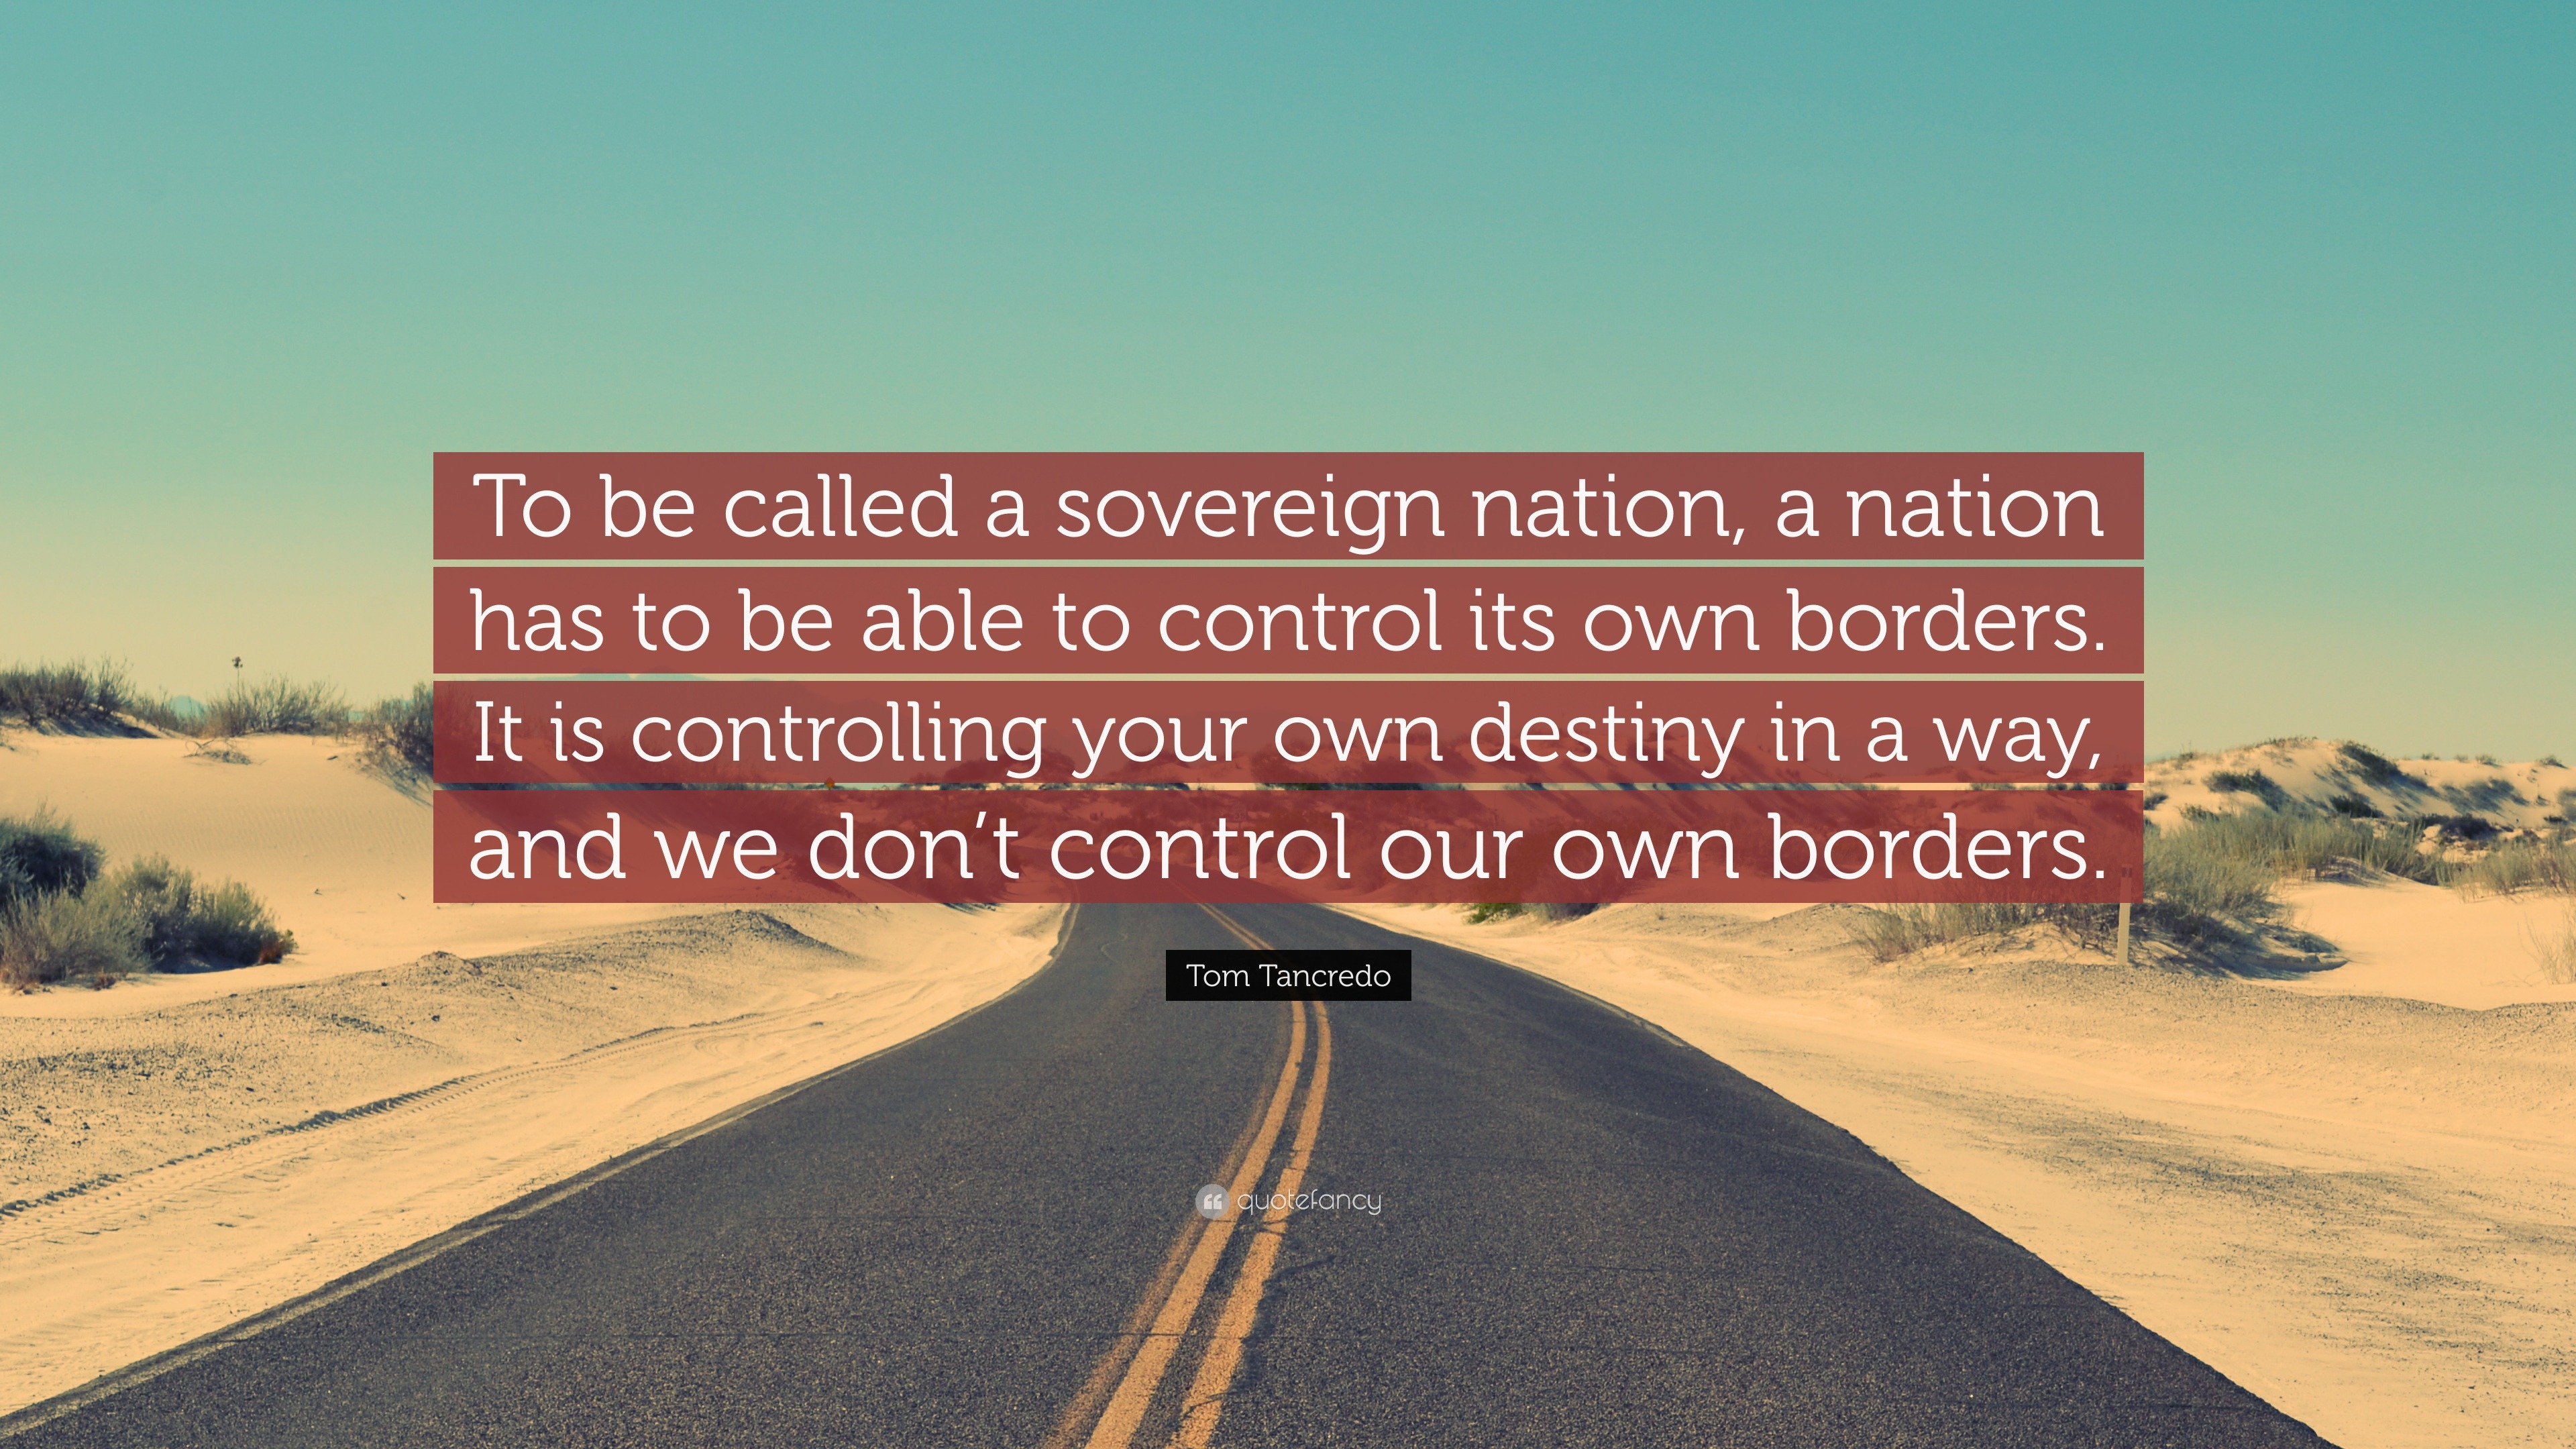 Tom Tancredo Quote “To be called a sovereign nation, a